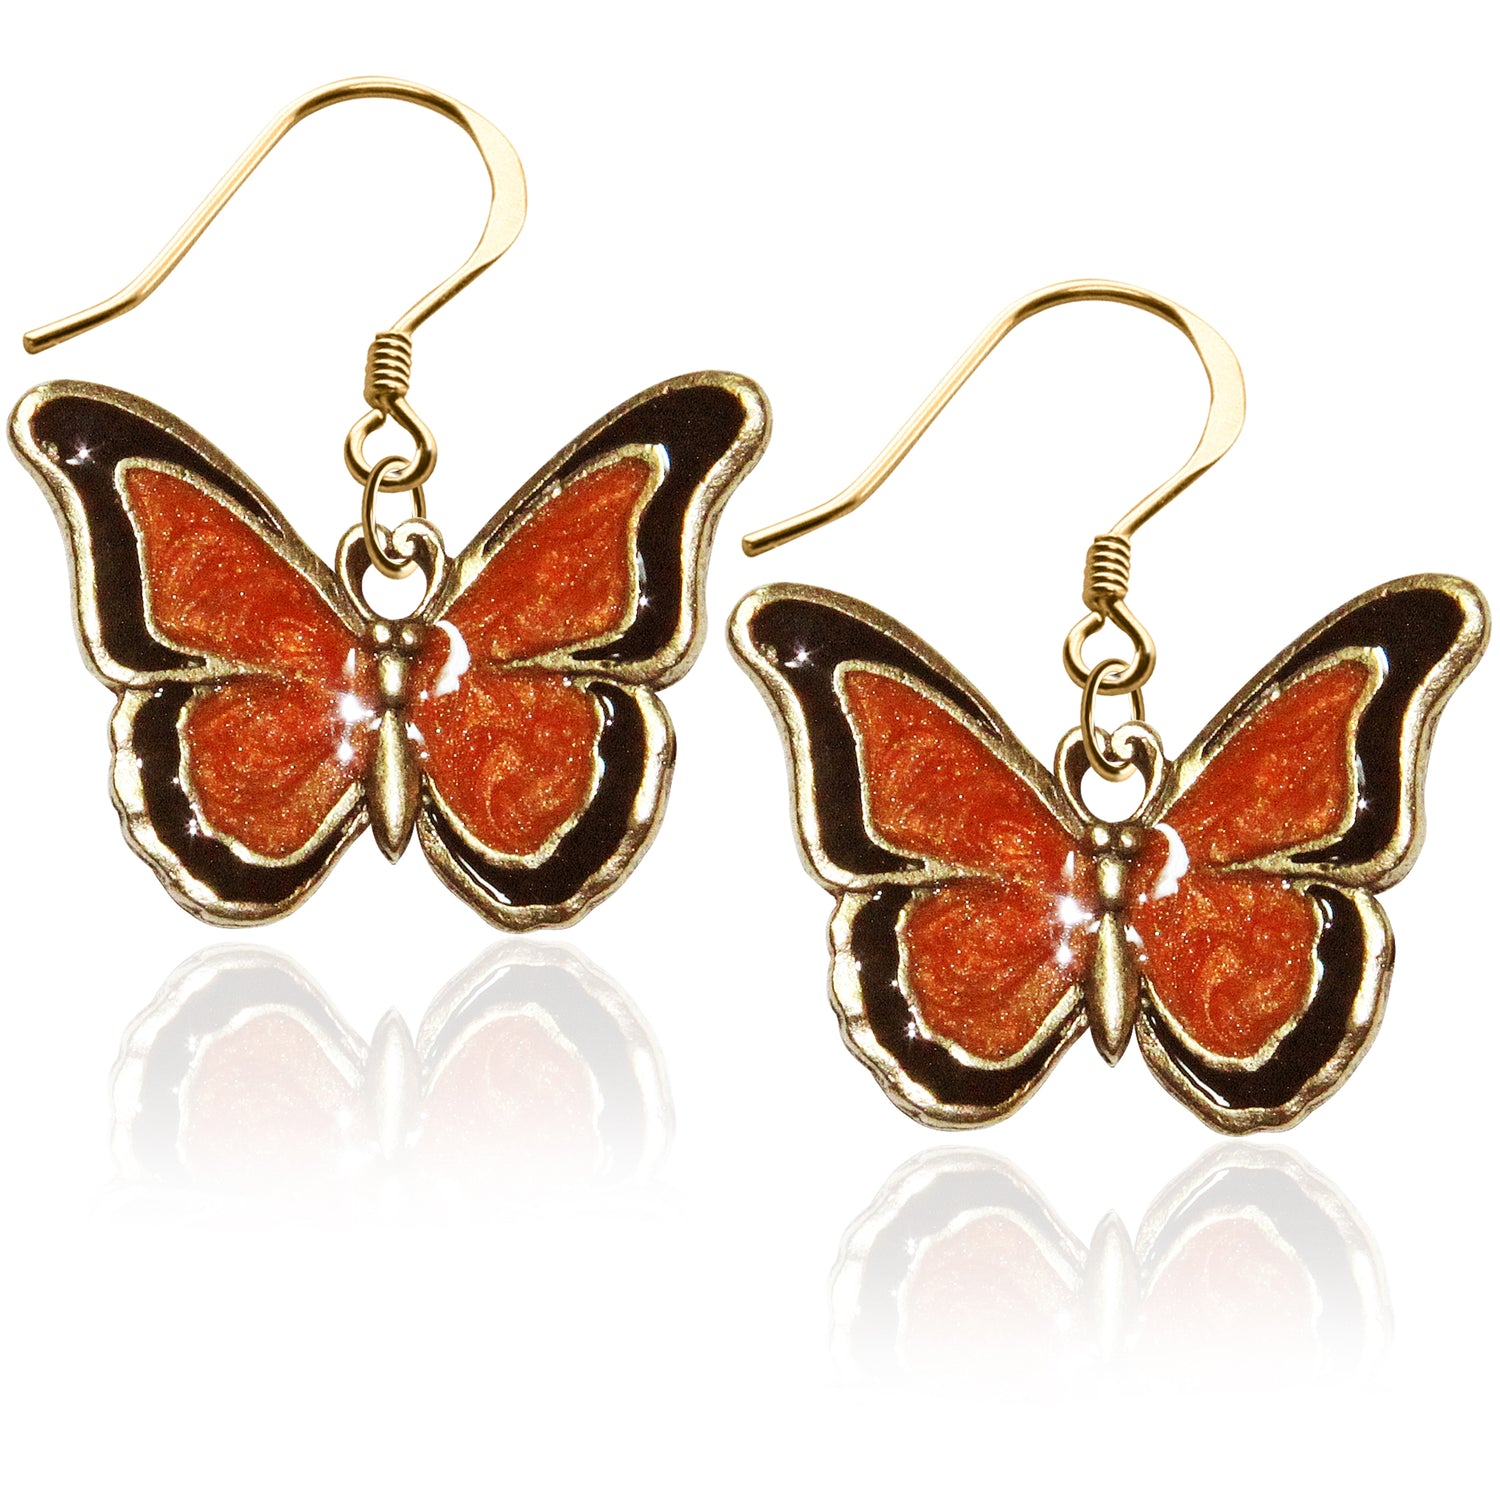 Whimsical Gifts | Butterfly Charm Earrings in Gold Finish | Animal Lover | Outdoor & Garden | Jewelry